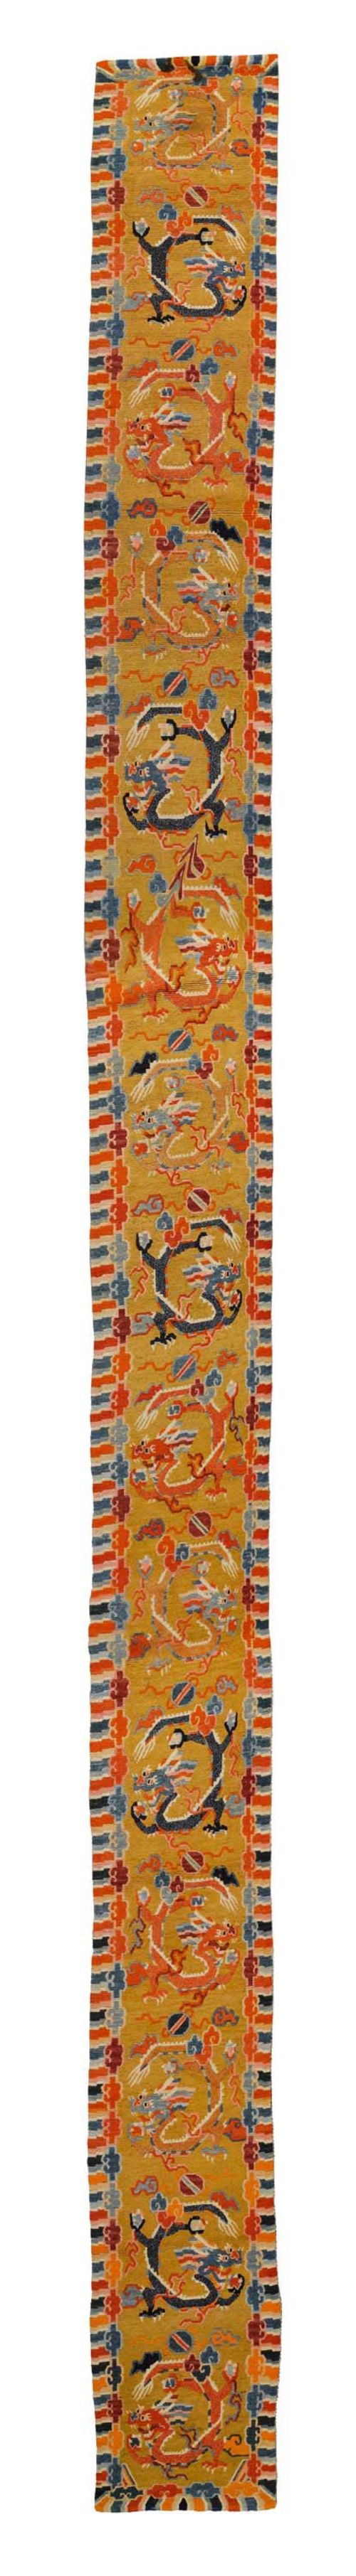 A WOOL RUNNER WITH POLYCHROME DRAGON MEDALLIONS ON AN OCHRE GROUND. Tibet, ca. 1920, 340x55 cm. Spots on the edge.